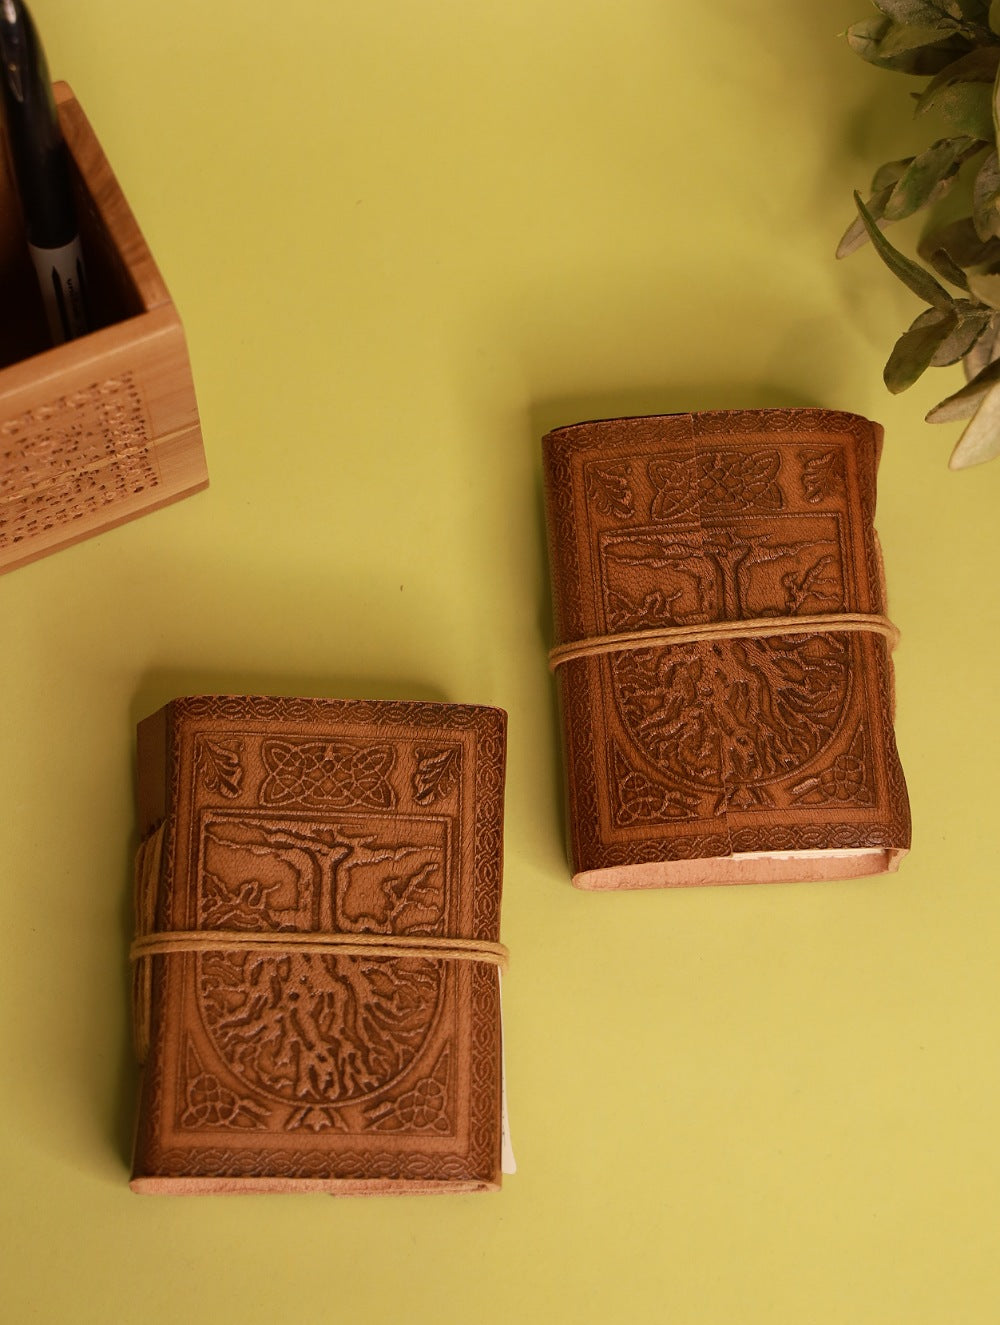 Load image into Gallery viewer, Embossed Leather Handmade Paper Diaries - Trees (Small, Set of 2)